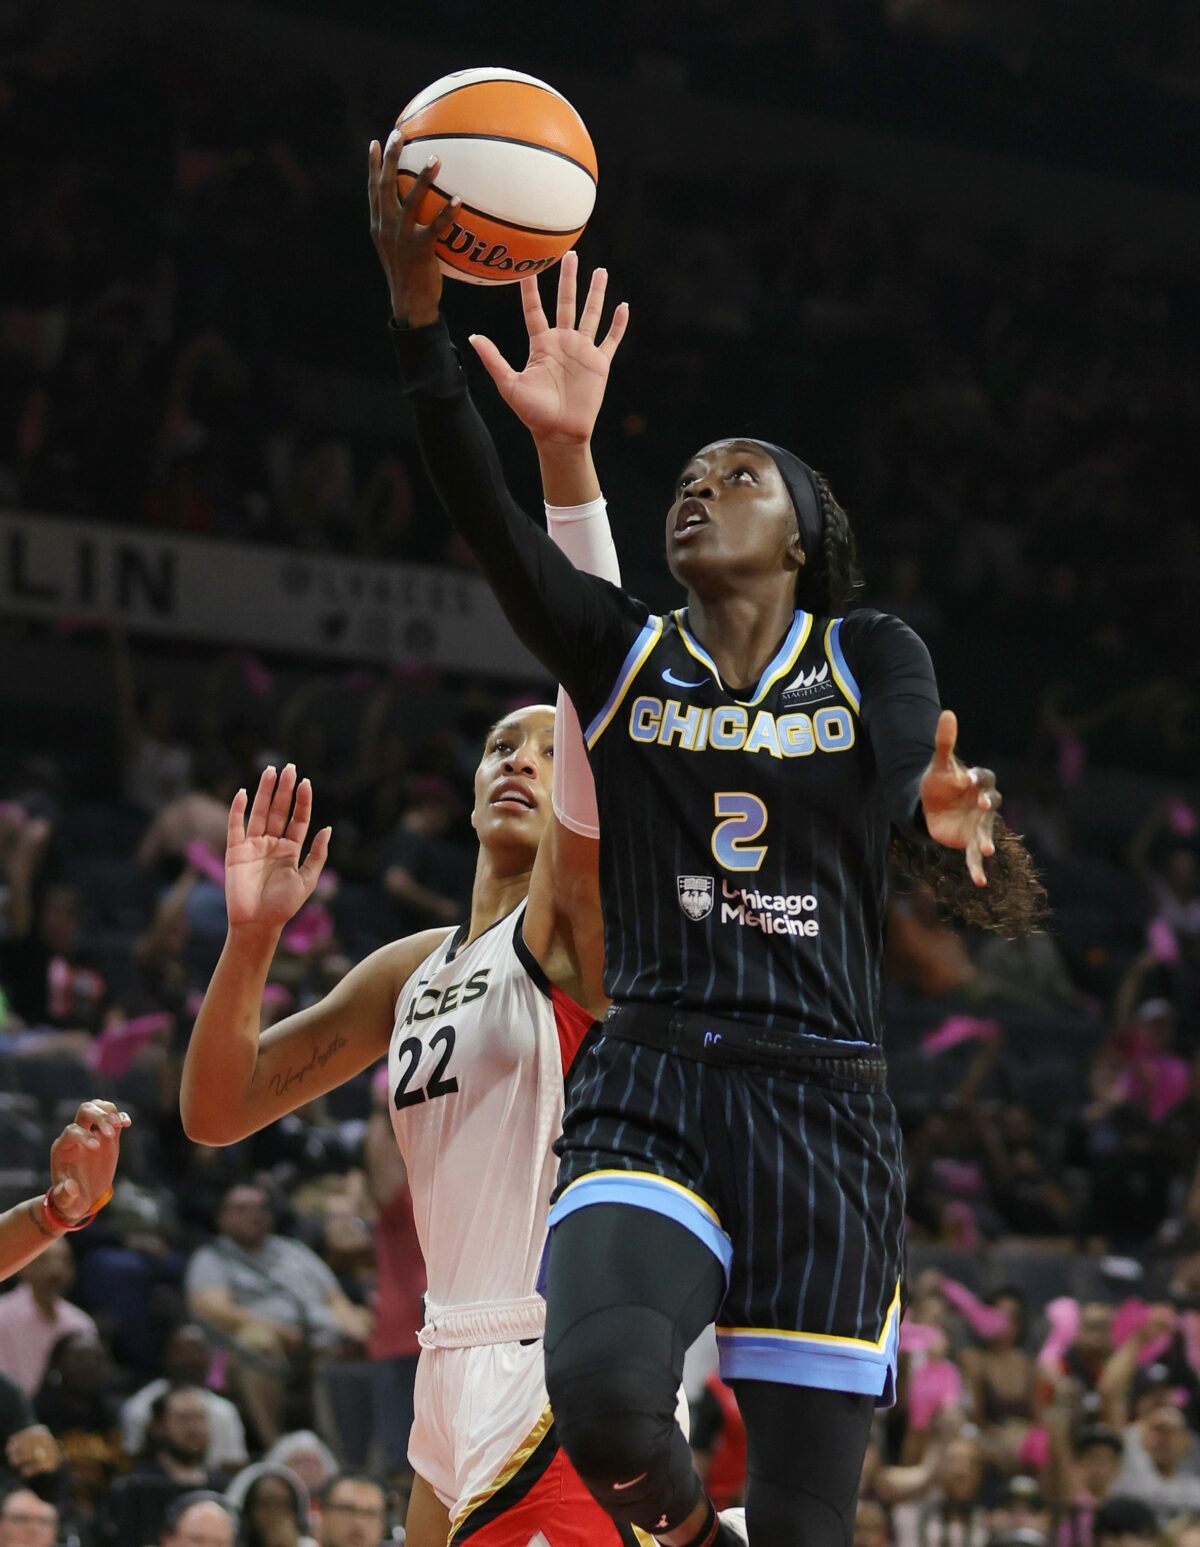 WNBA superstars A’ja Wilson and Kahleah Copper sign massive sponsorships as the league continues to grow